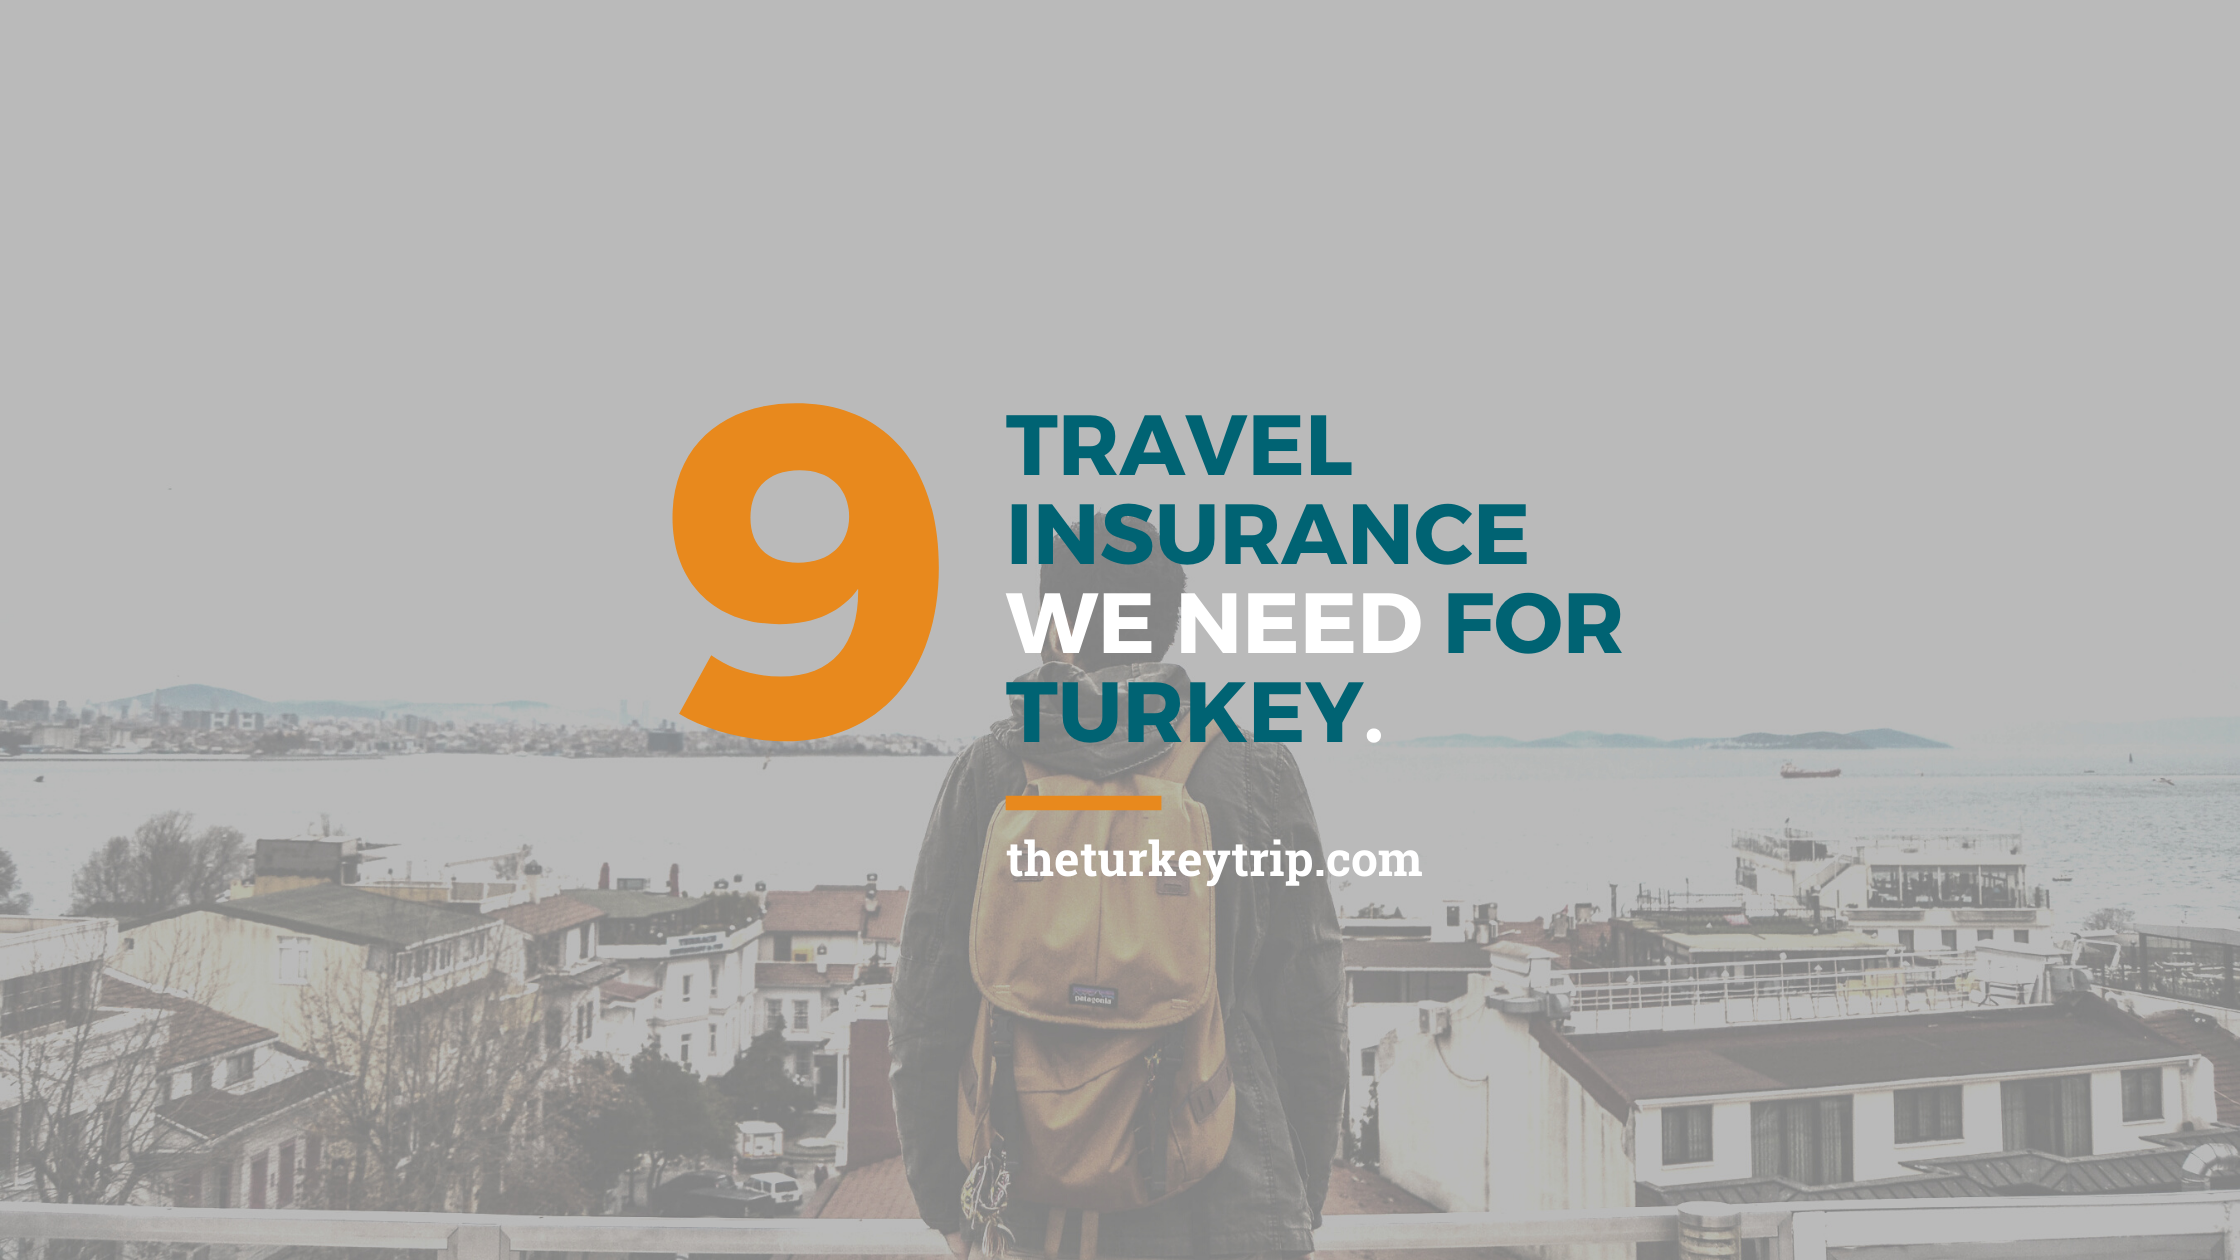 [9 Important Points] Answers To What Travel Insurance We Need For